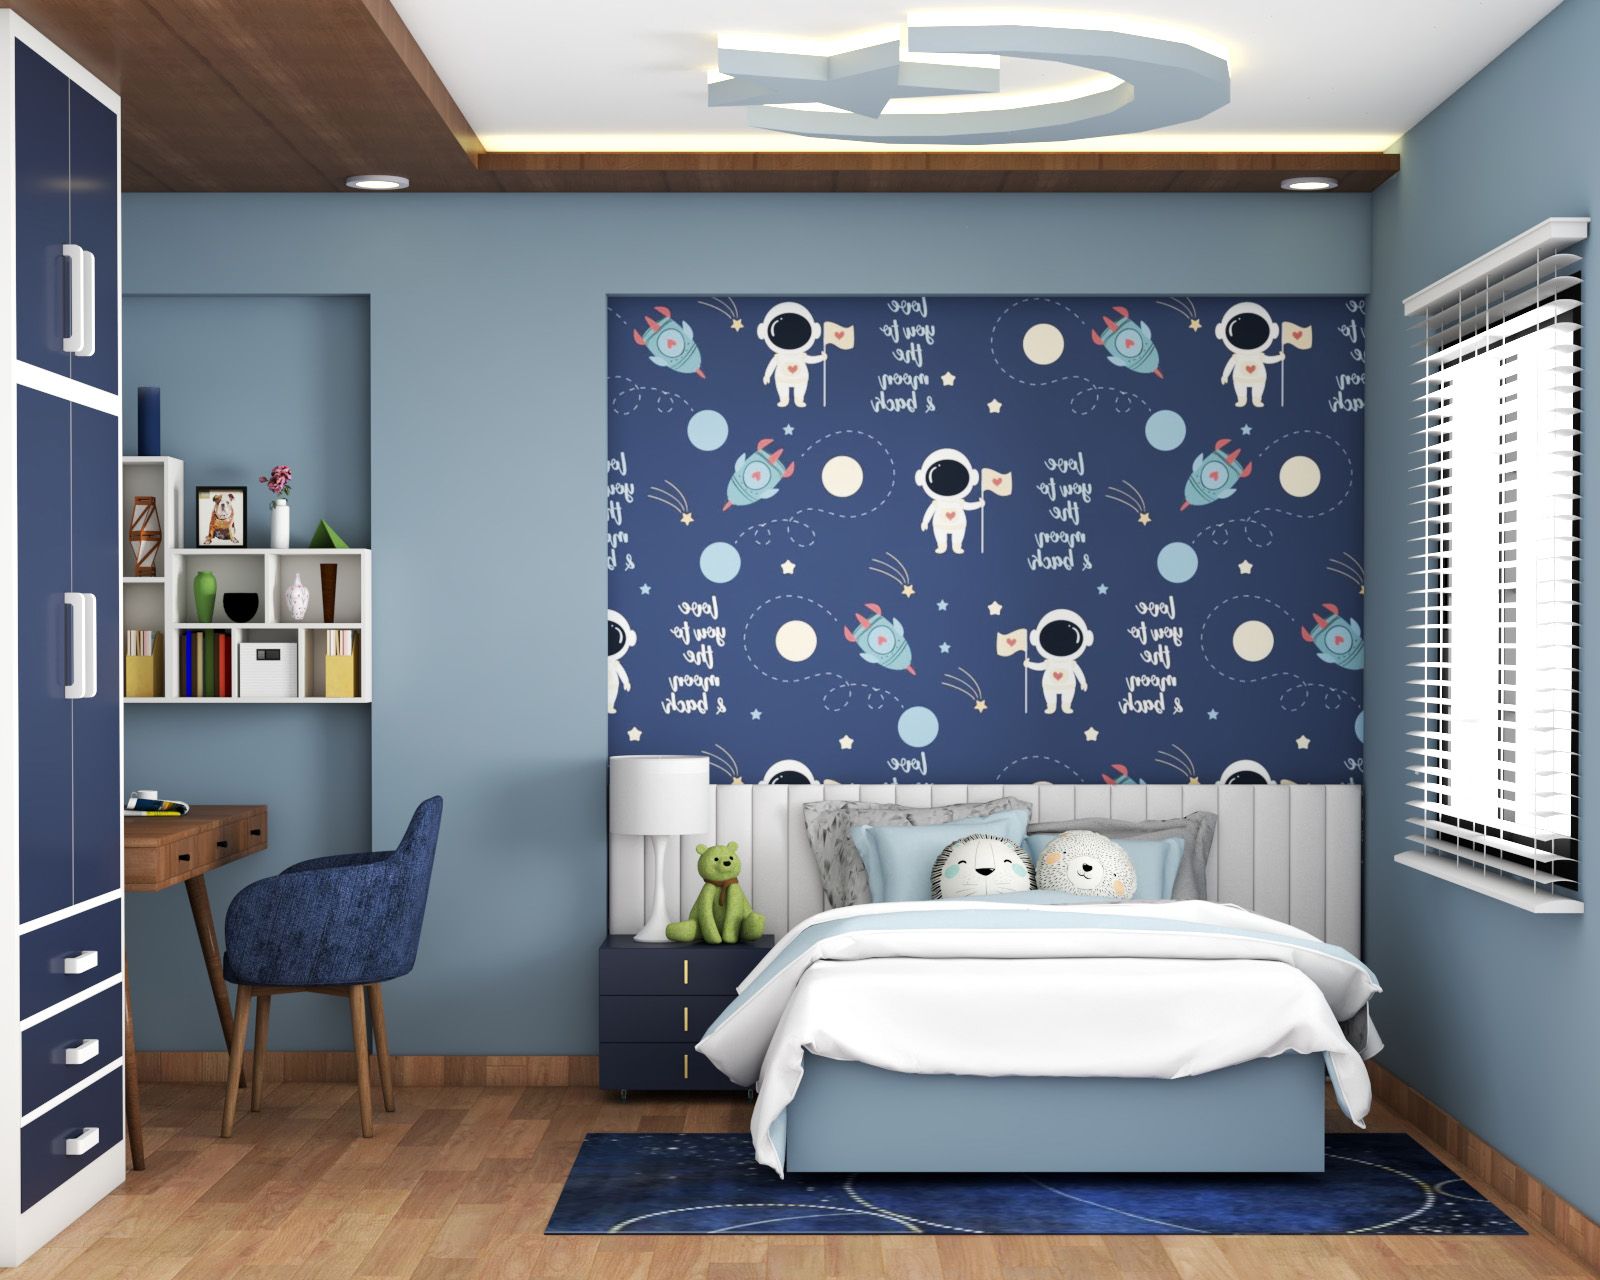 Contemporary Blue Boys Room Design With Space-Themed Wallpaper